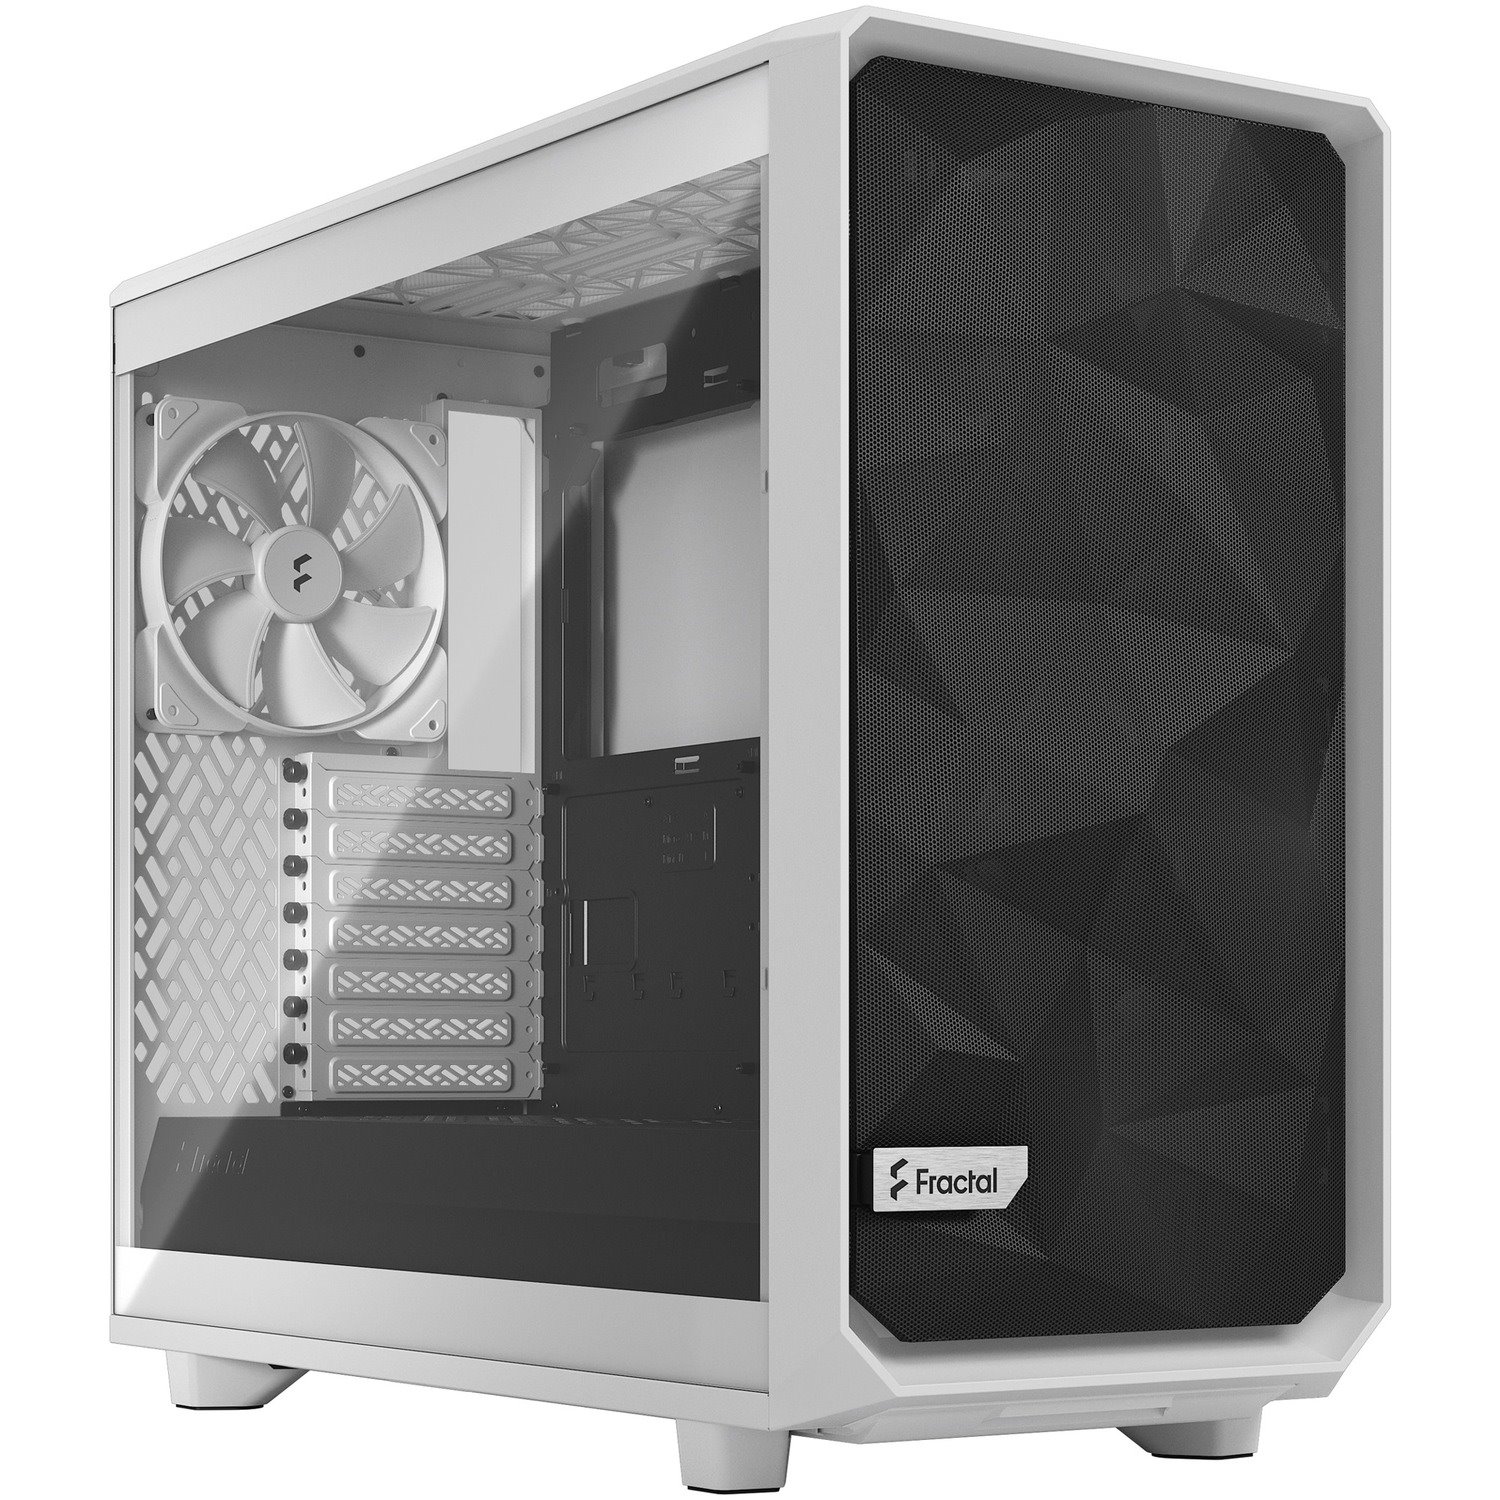 Fractal Design Meshify 2 Lite Computer Case - EATX, ATX Motherboard Supported - Tower - Tempered Glass, Steel - White